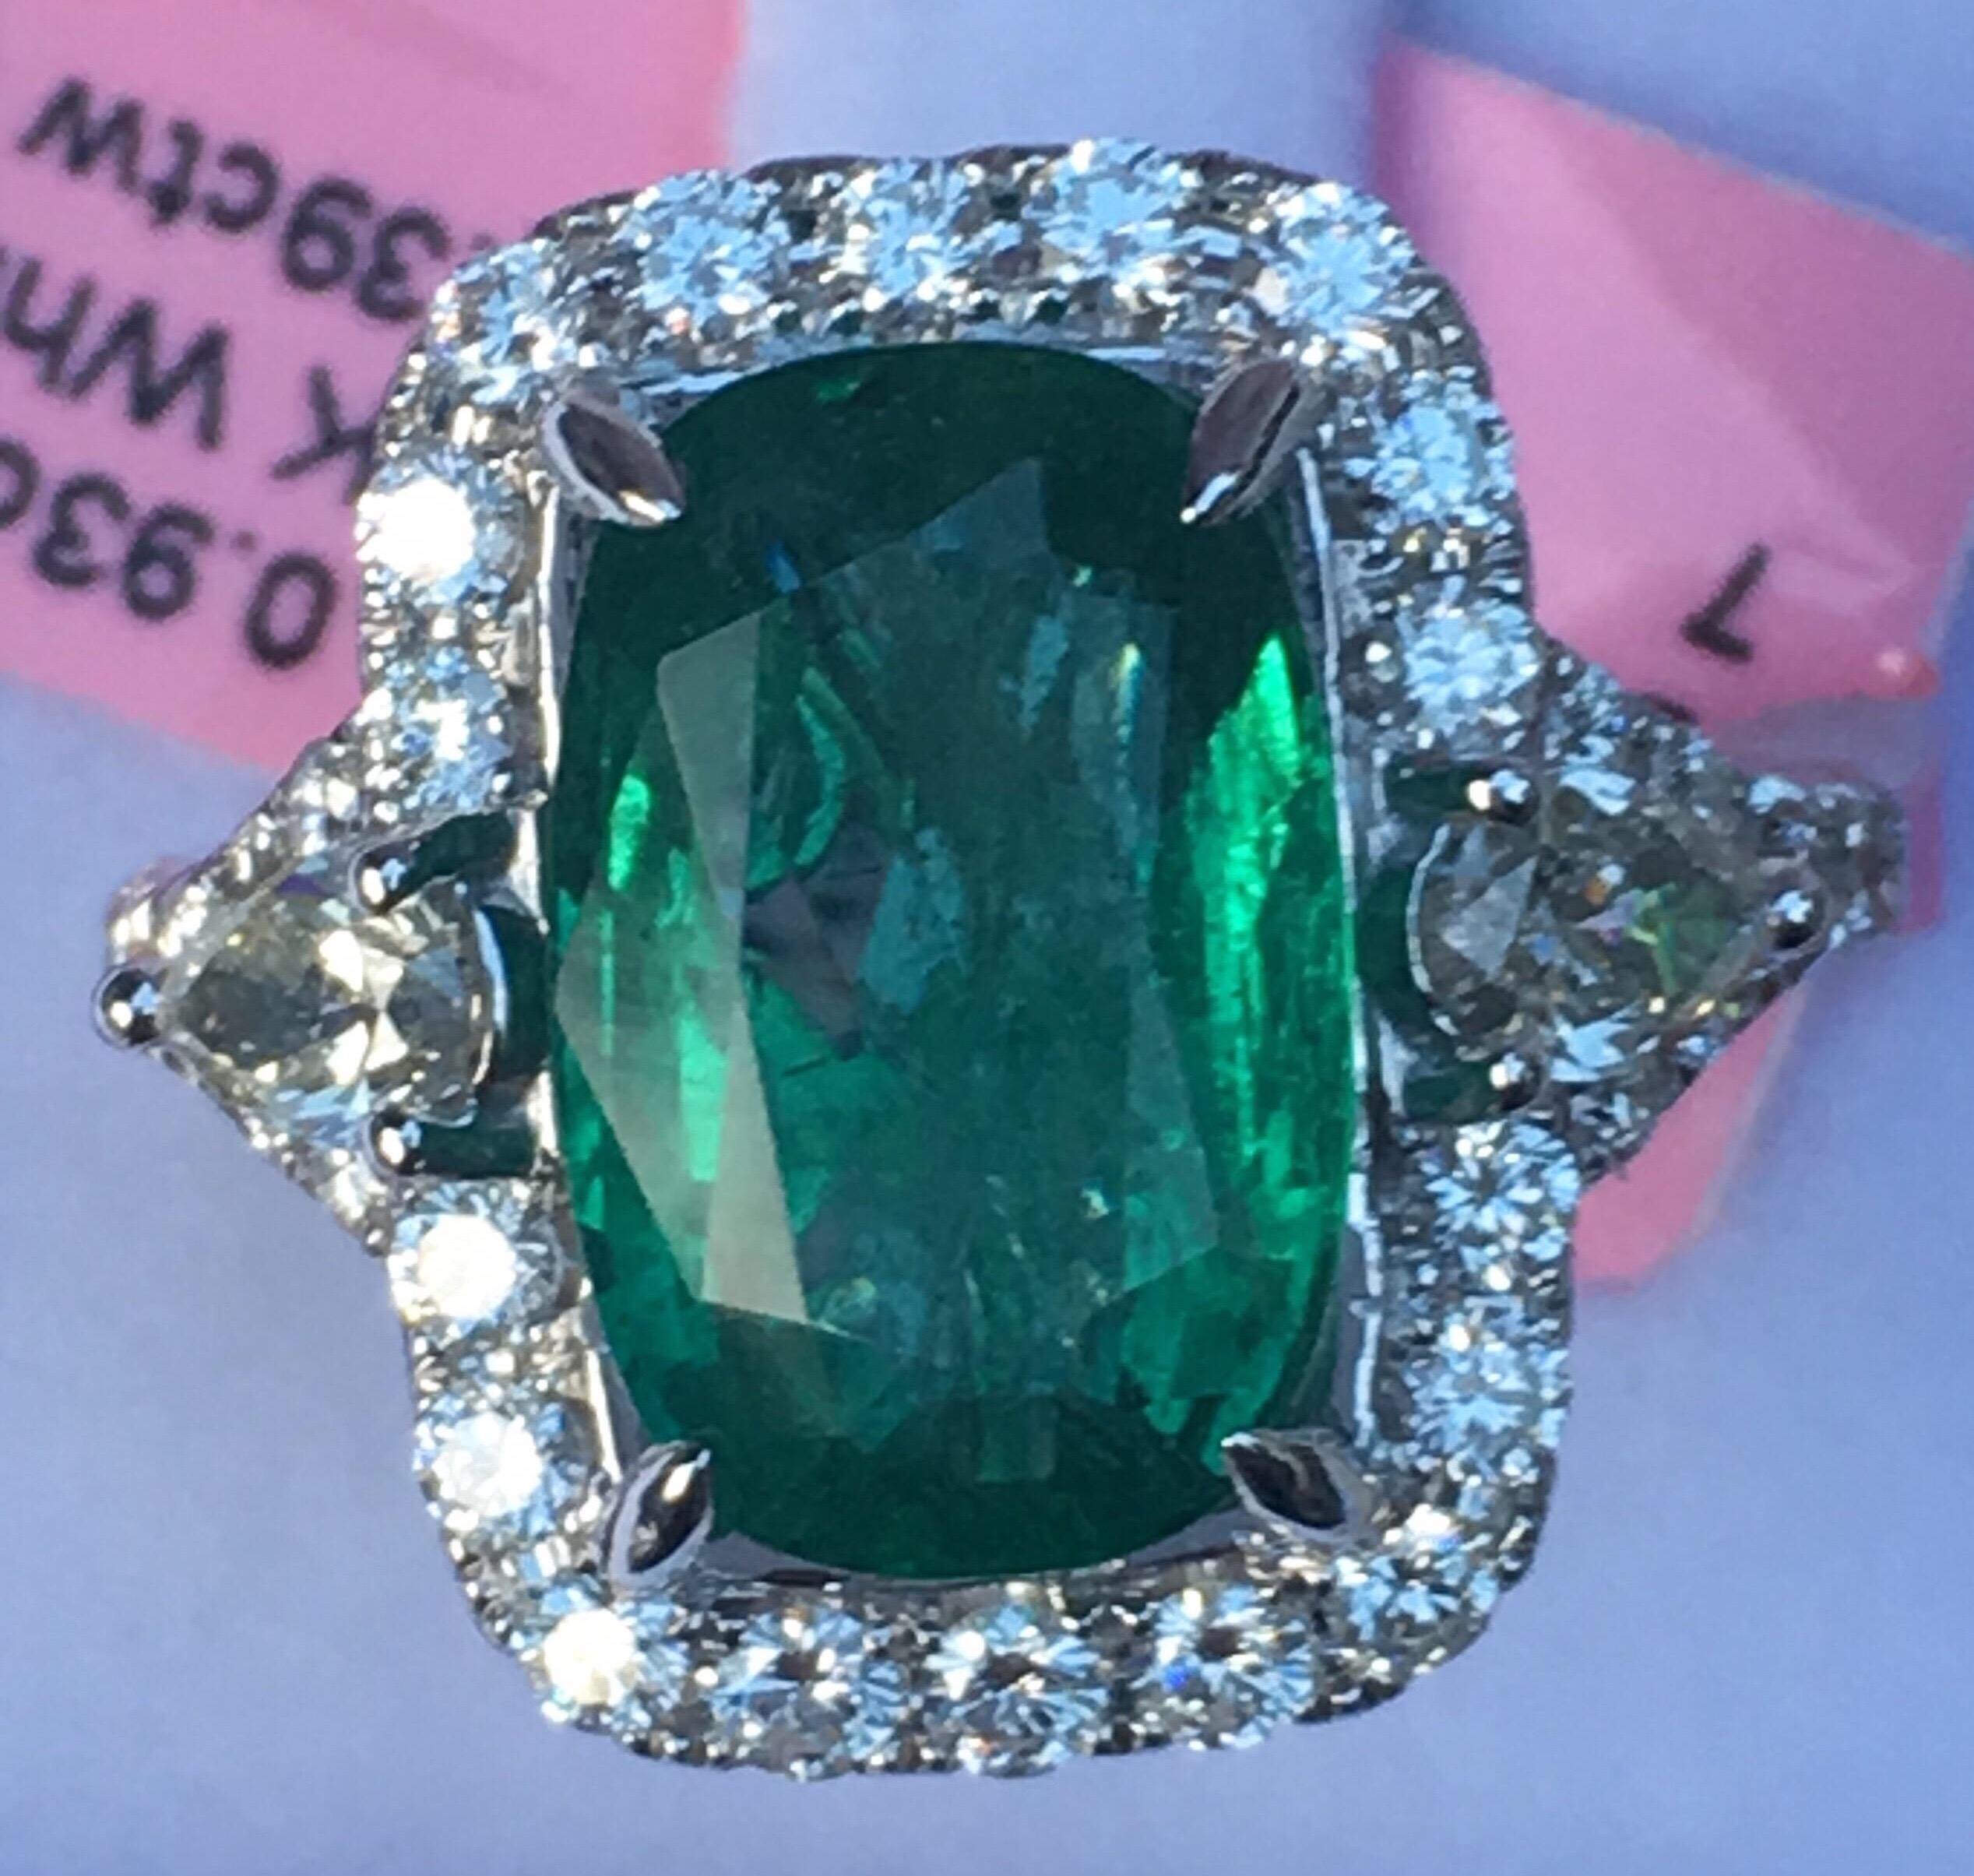 Natural Emerald and Diamonds Set in 18K White Gold. The Emerald is 4.42 Carat and Total Weight of Diamond is 1.32 Carat. The Ring is hand crafted one of a kind .Size of the Ring is 7 but can be resized.